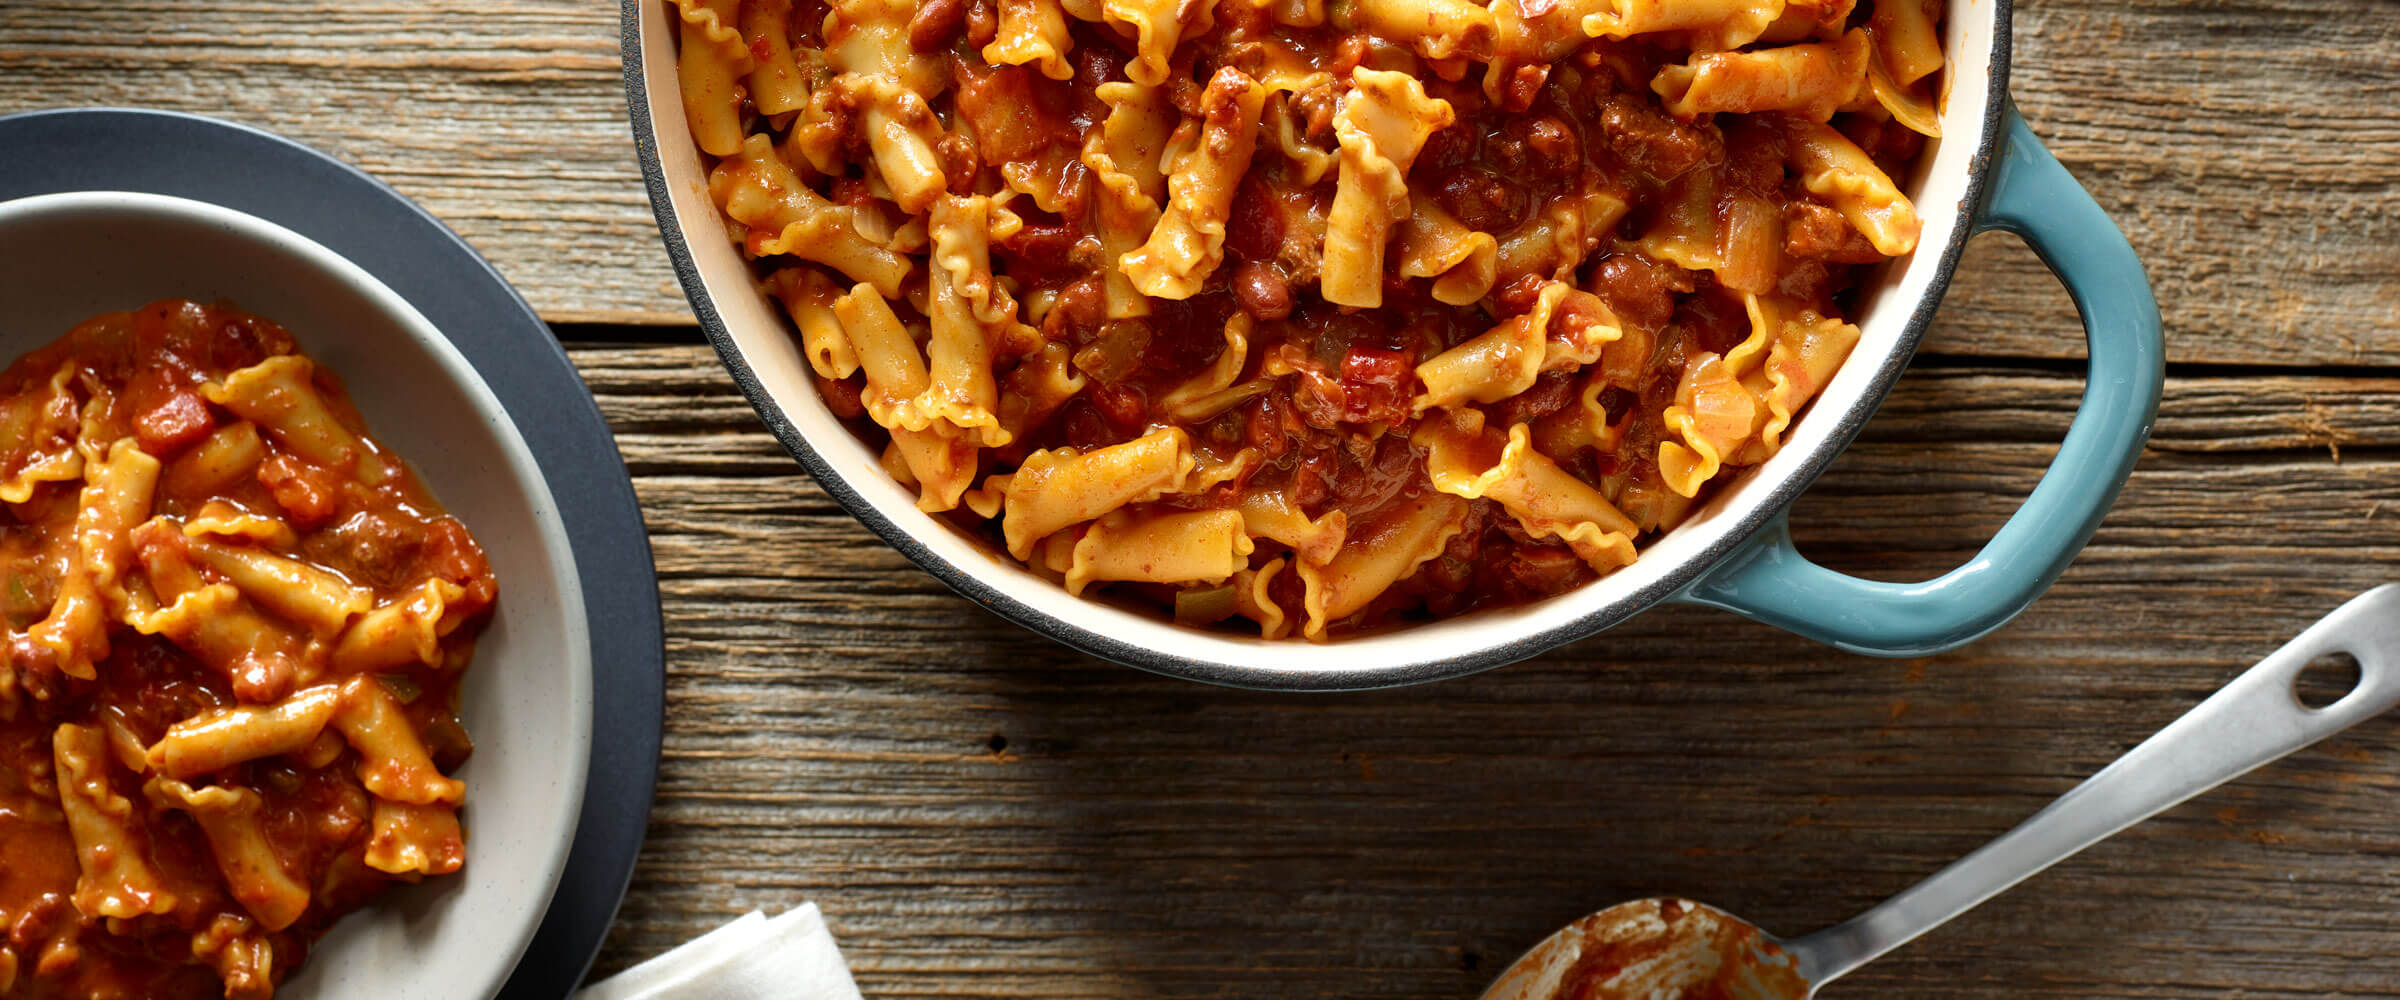 One Pot Chili and Cheese Pasta in blue dish with serving in a bowl